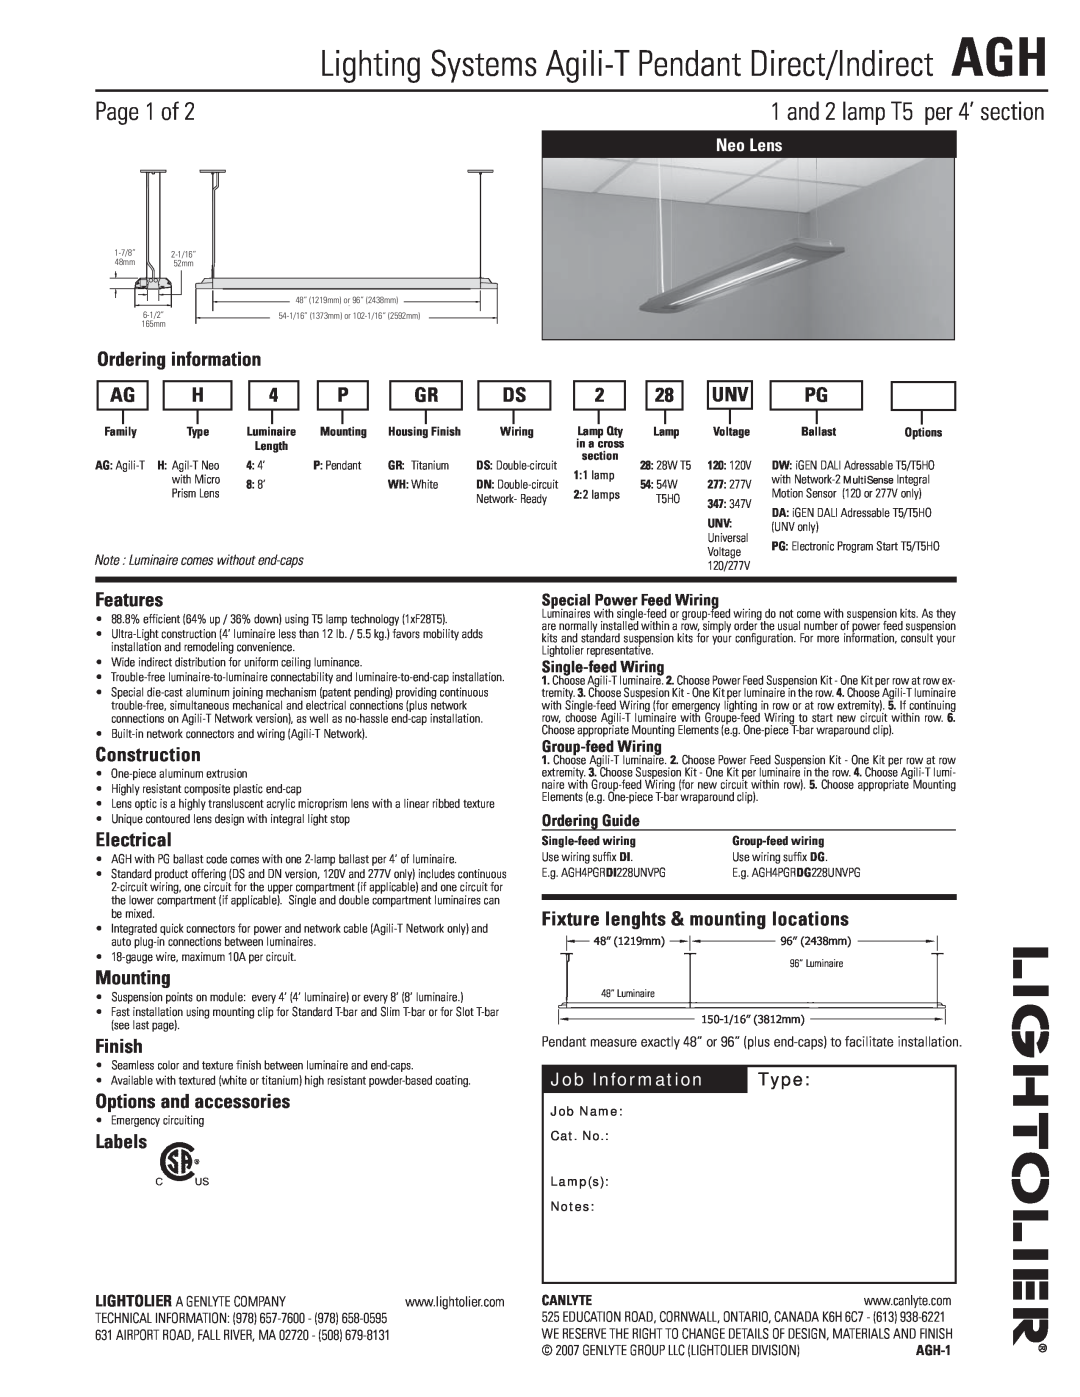 Lightolier AGH manual Page 1 of, and 2 lamp T5 per 4’ section 